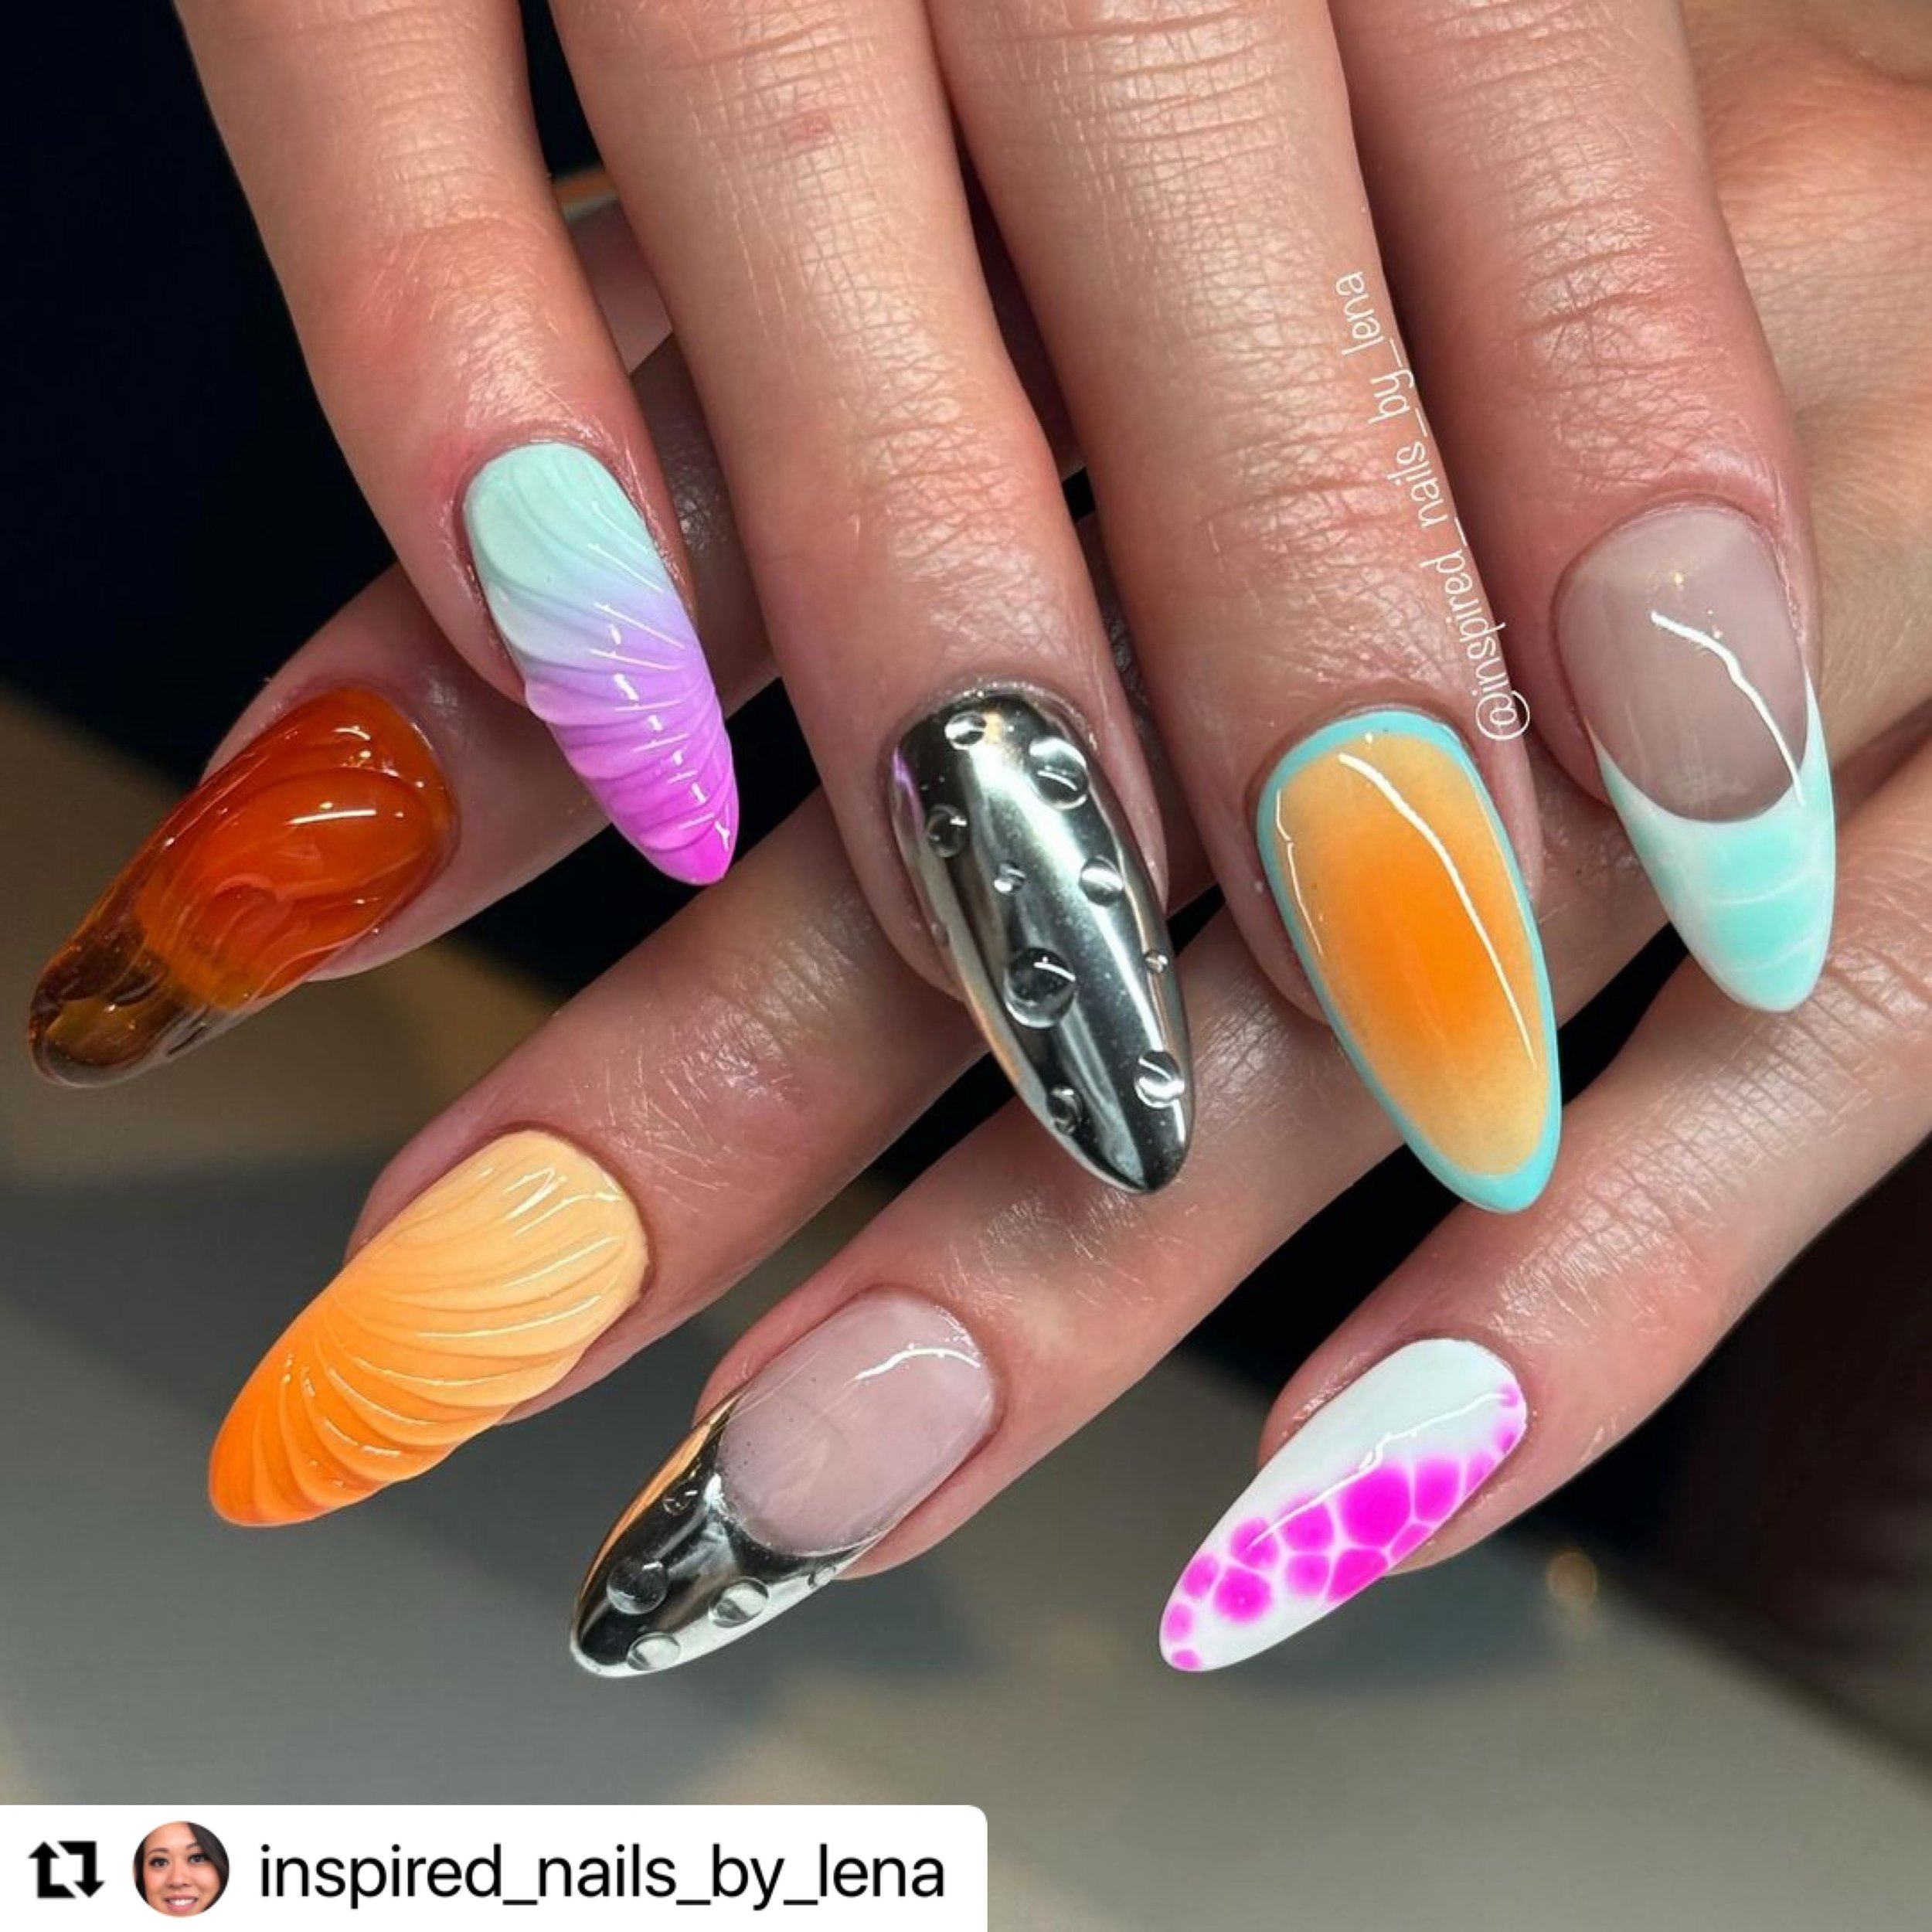 #Repost @inspired_nails_by_lena with @use.repost
・・・
Miami vibes for @lexiianthony 🔥🔥
.
Acrylic + Level 3 nail art